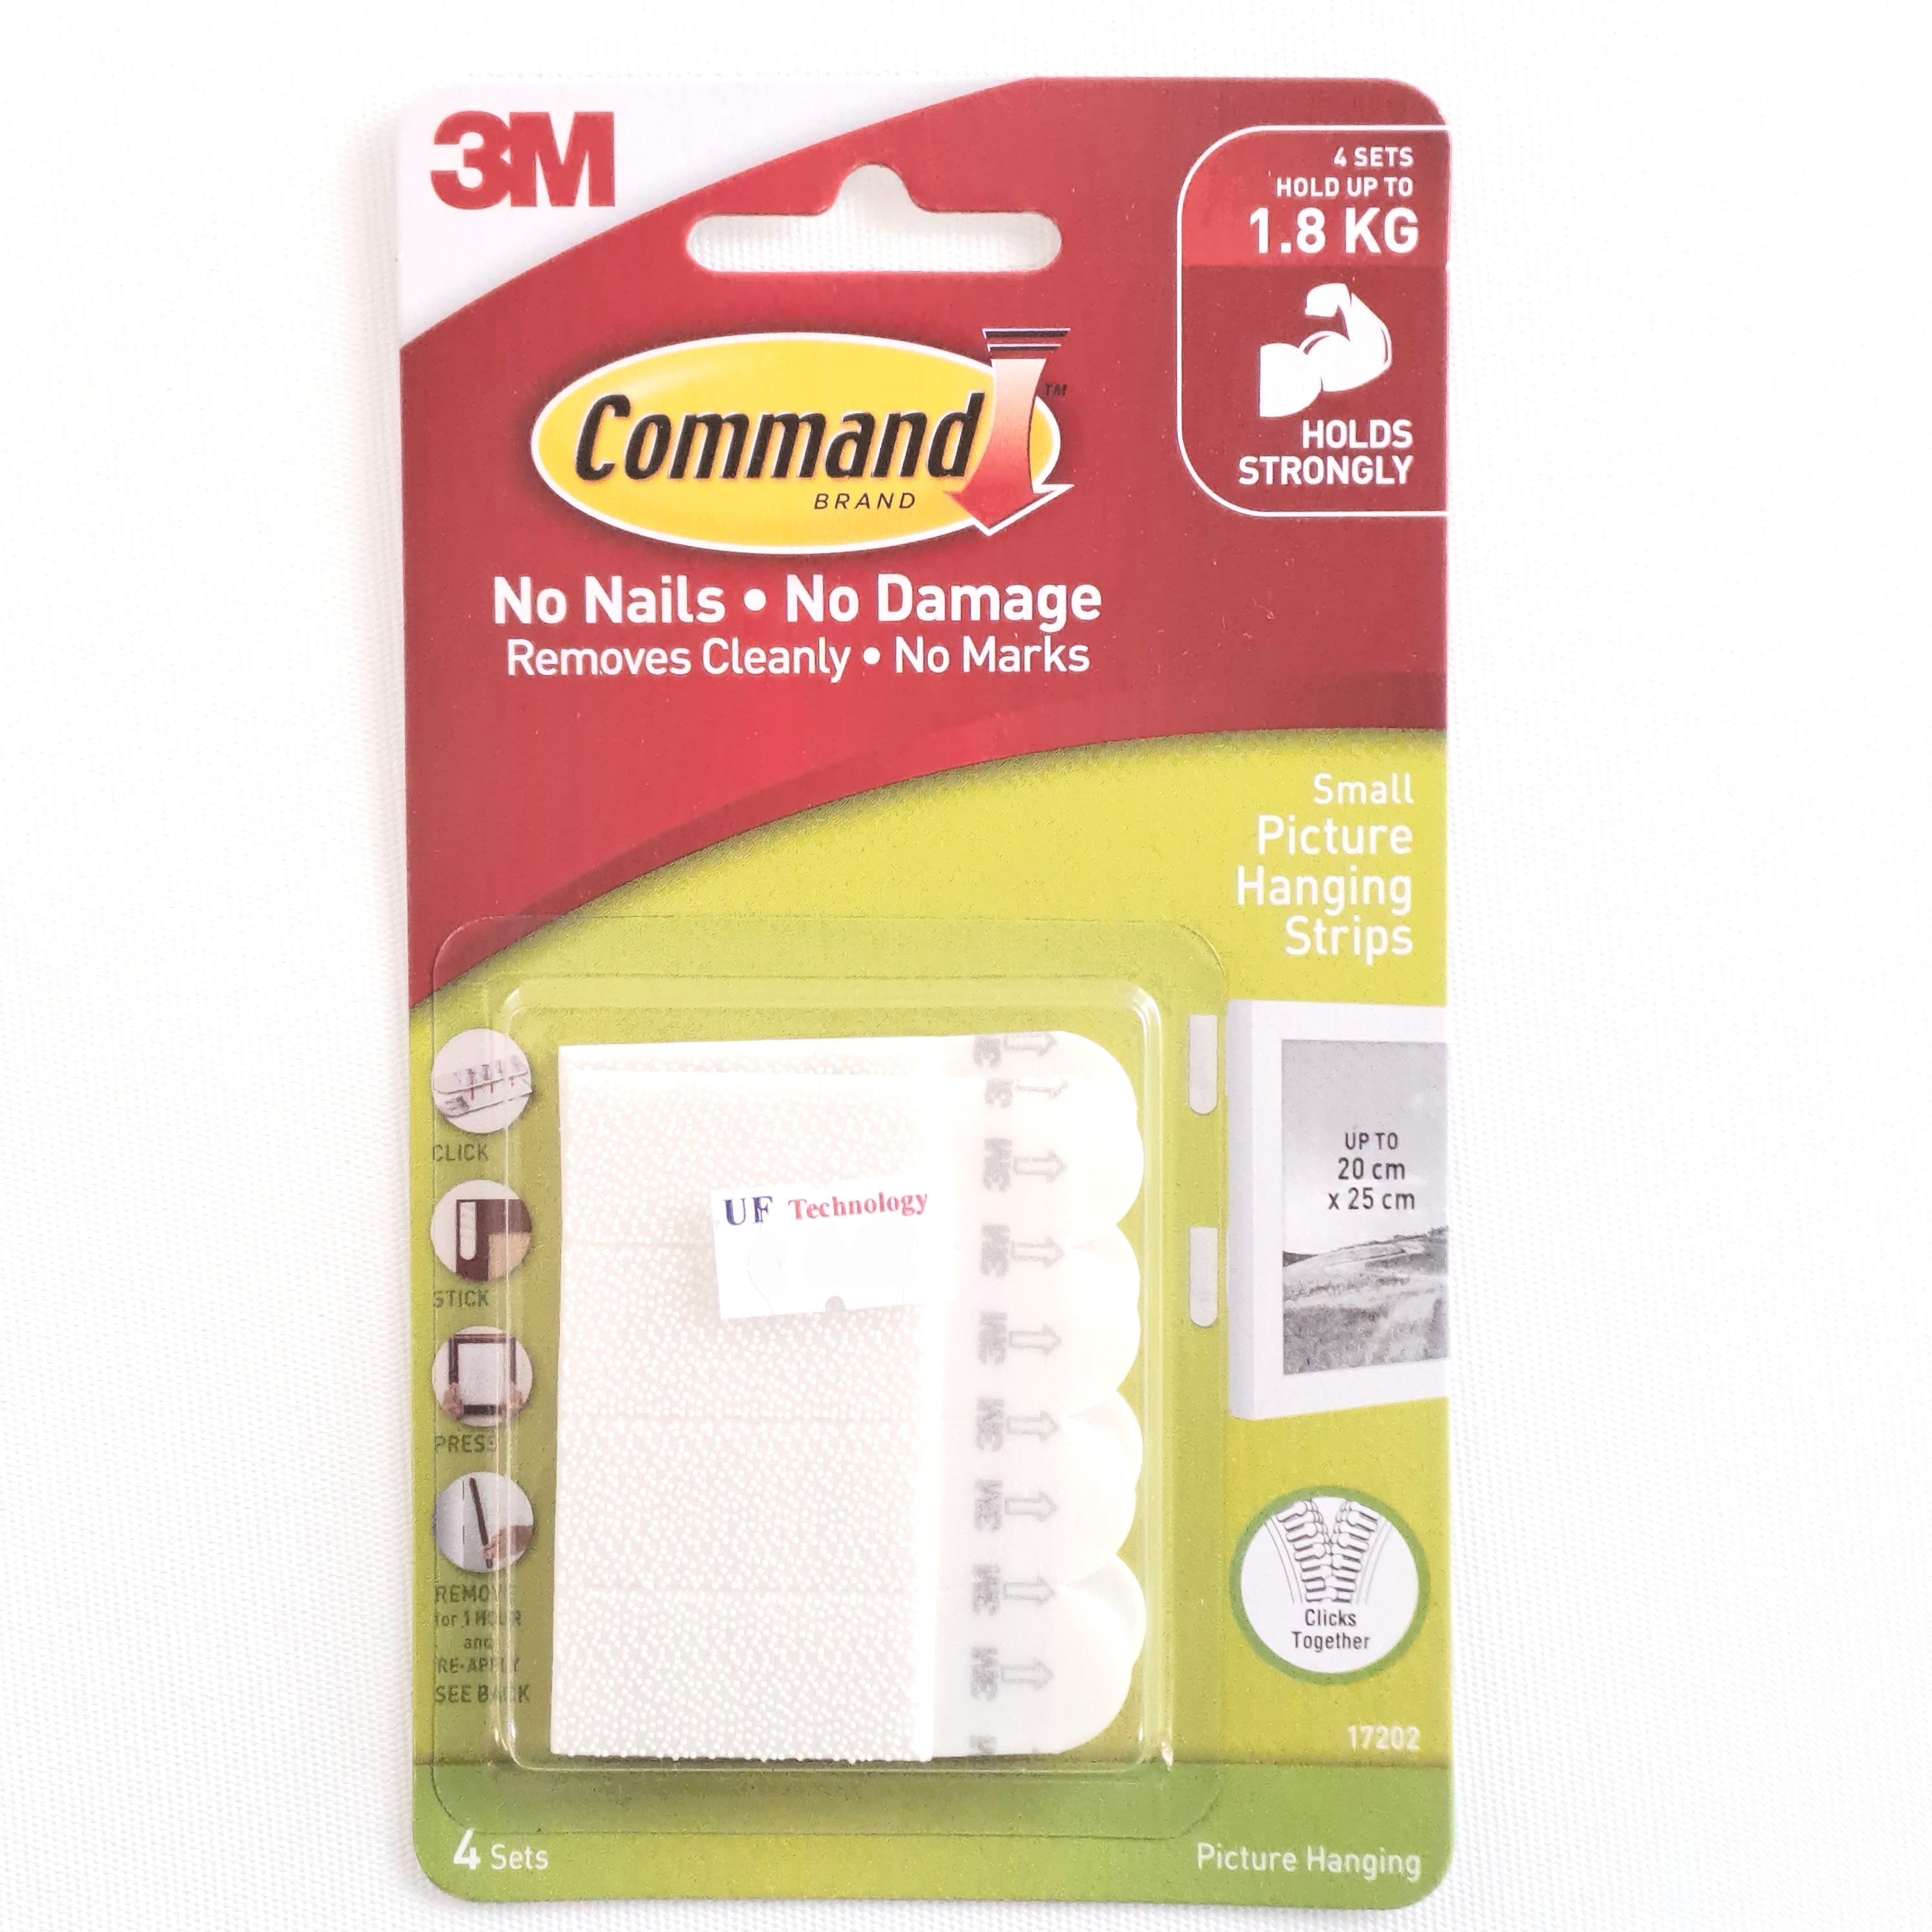 3M Command Small Picture Hanging Strips 4 Sets (30271)